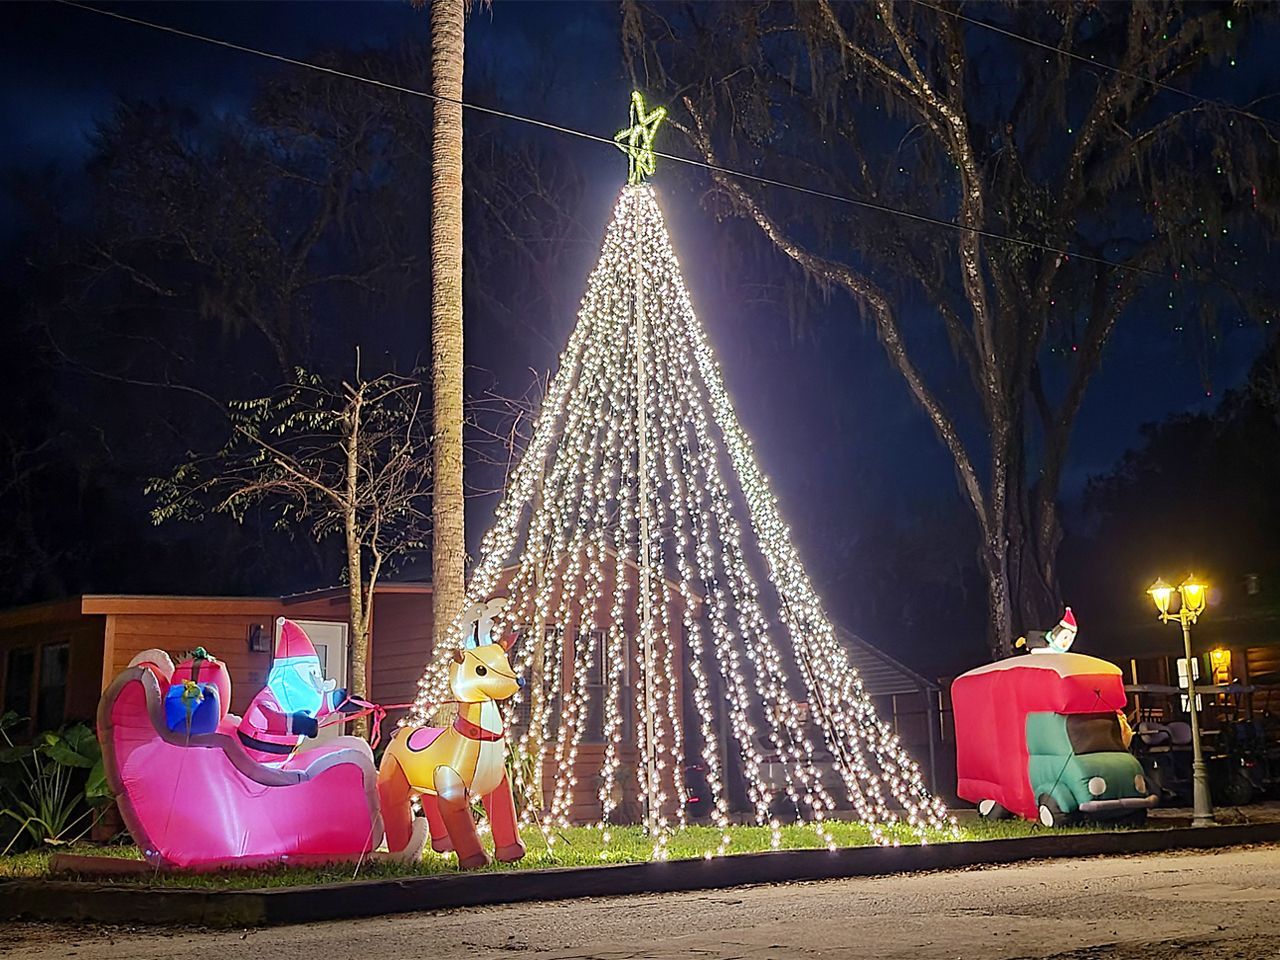 a christmas tree is lit up at night with a sleigh and santa claus .